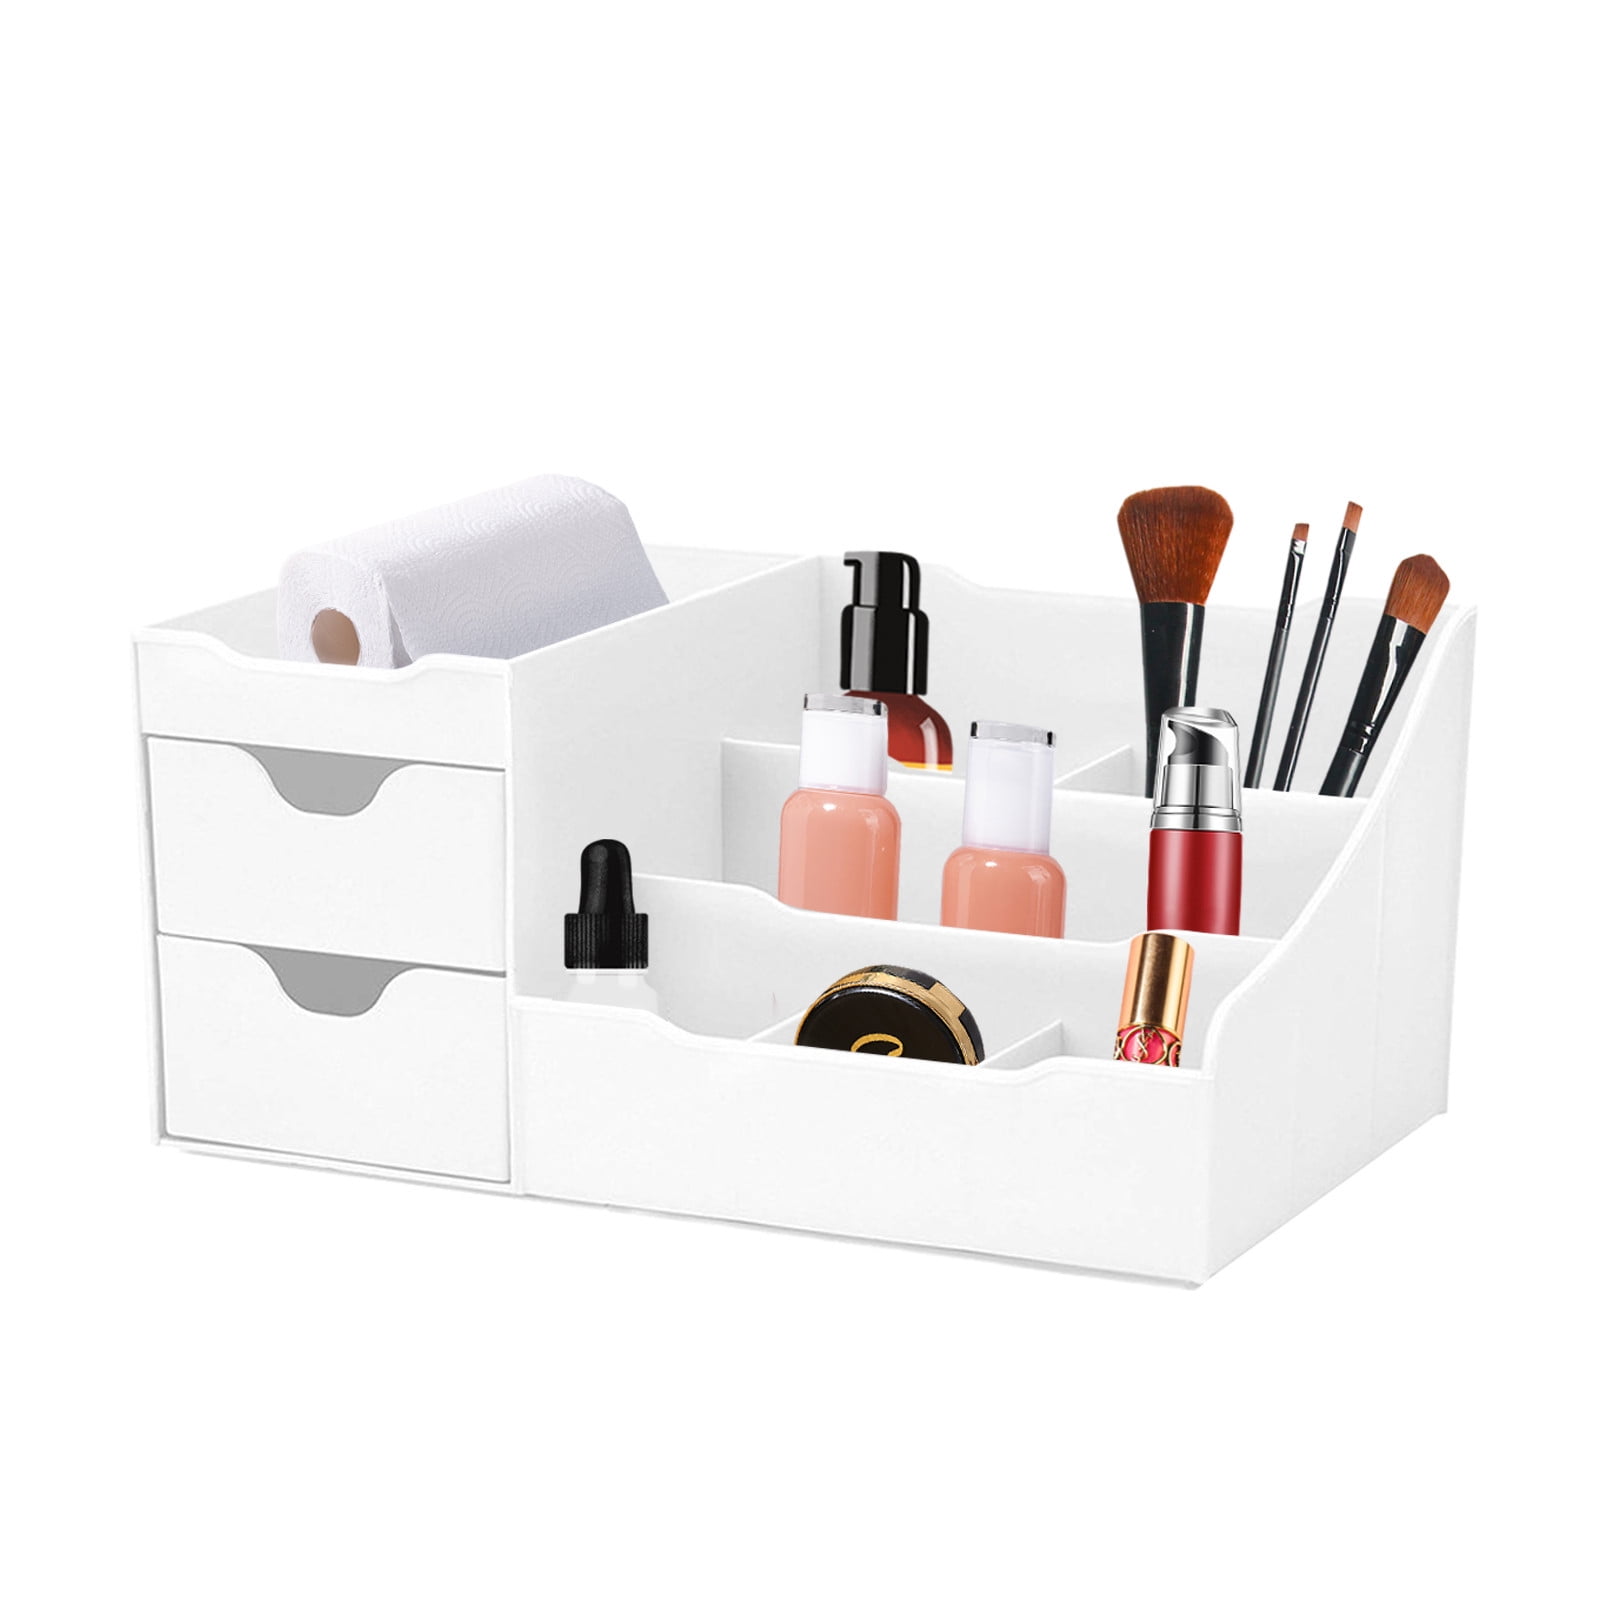 organization and storage Storage bog with Uncluttered Designs Drawers Organizer Makeup White Housekeeping & -